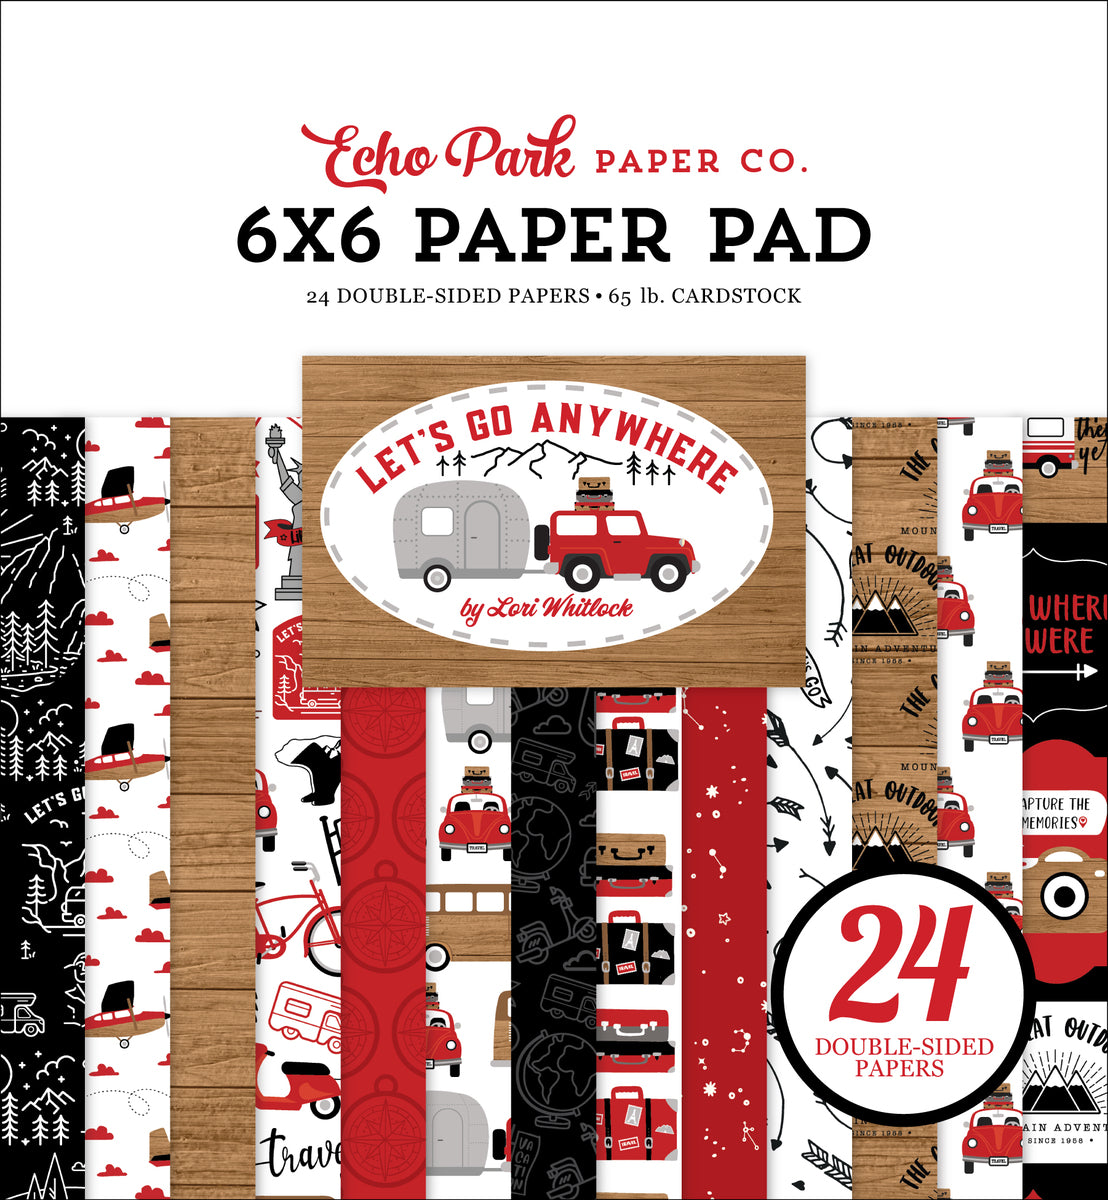 Let's Go Anywhere 6x6 patterned paper pad from Echo Park Paper